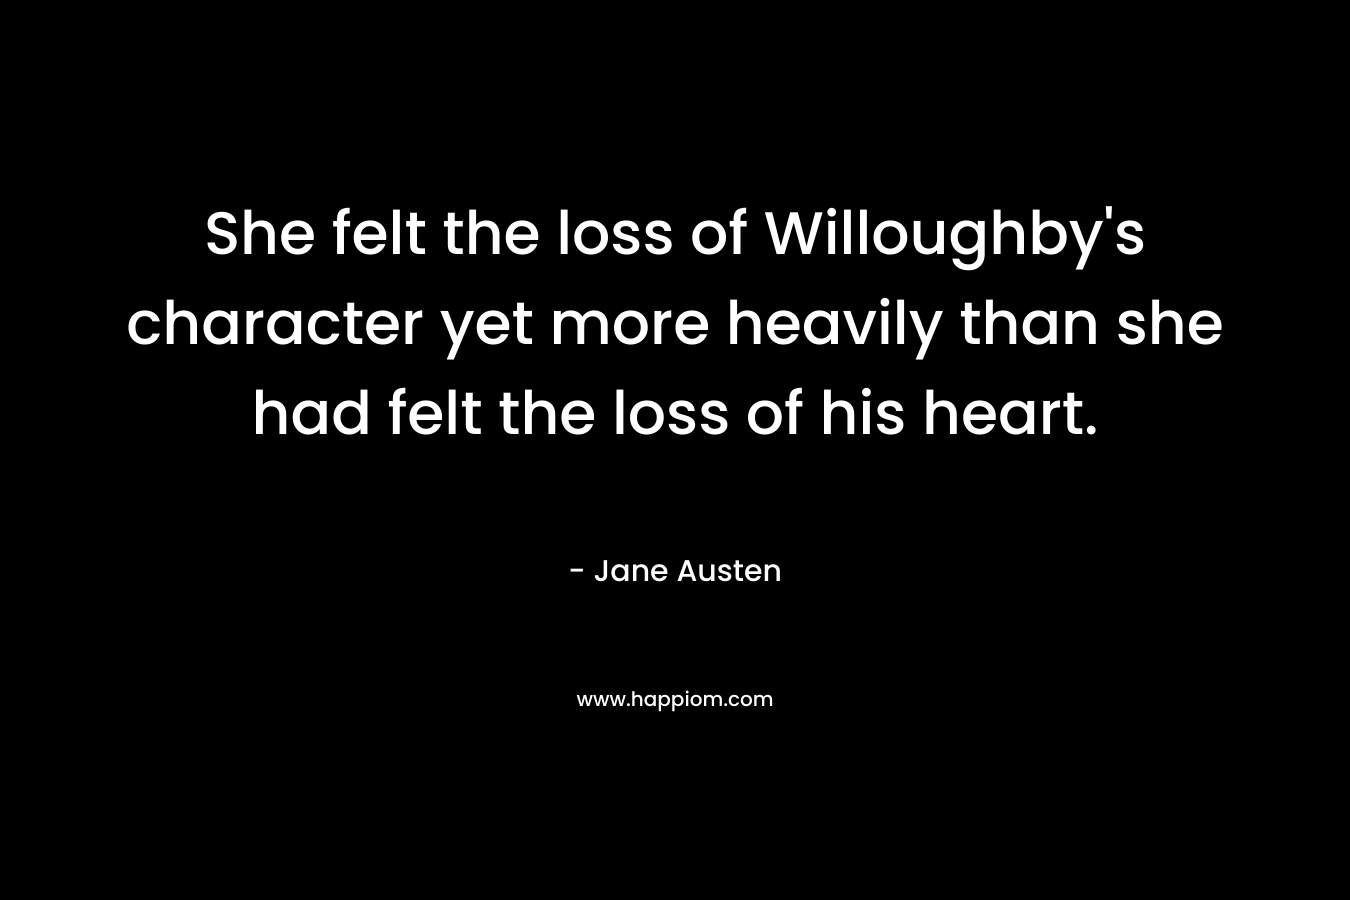 She felt the loss of Willoughby’s character yet more heavily than she had felt the loss of his heart. – Jane Austen